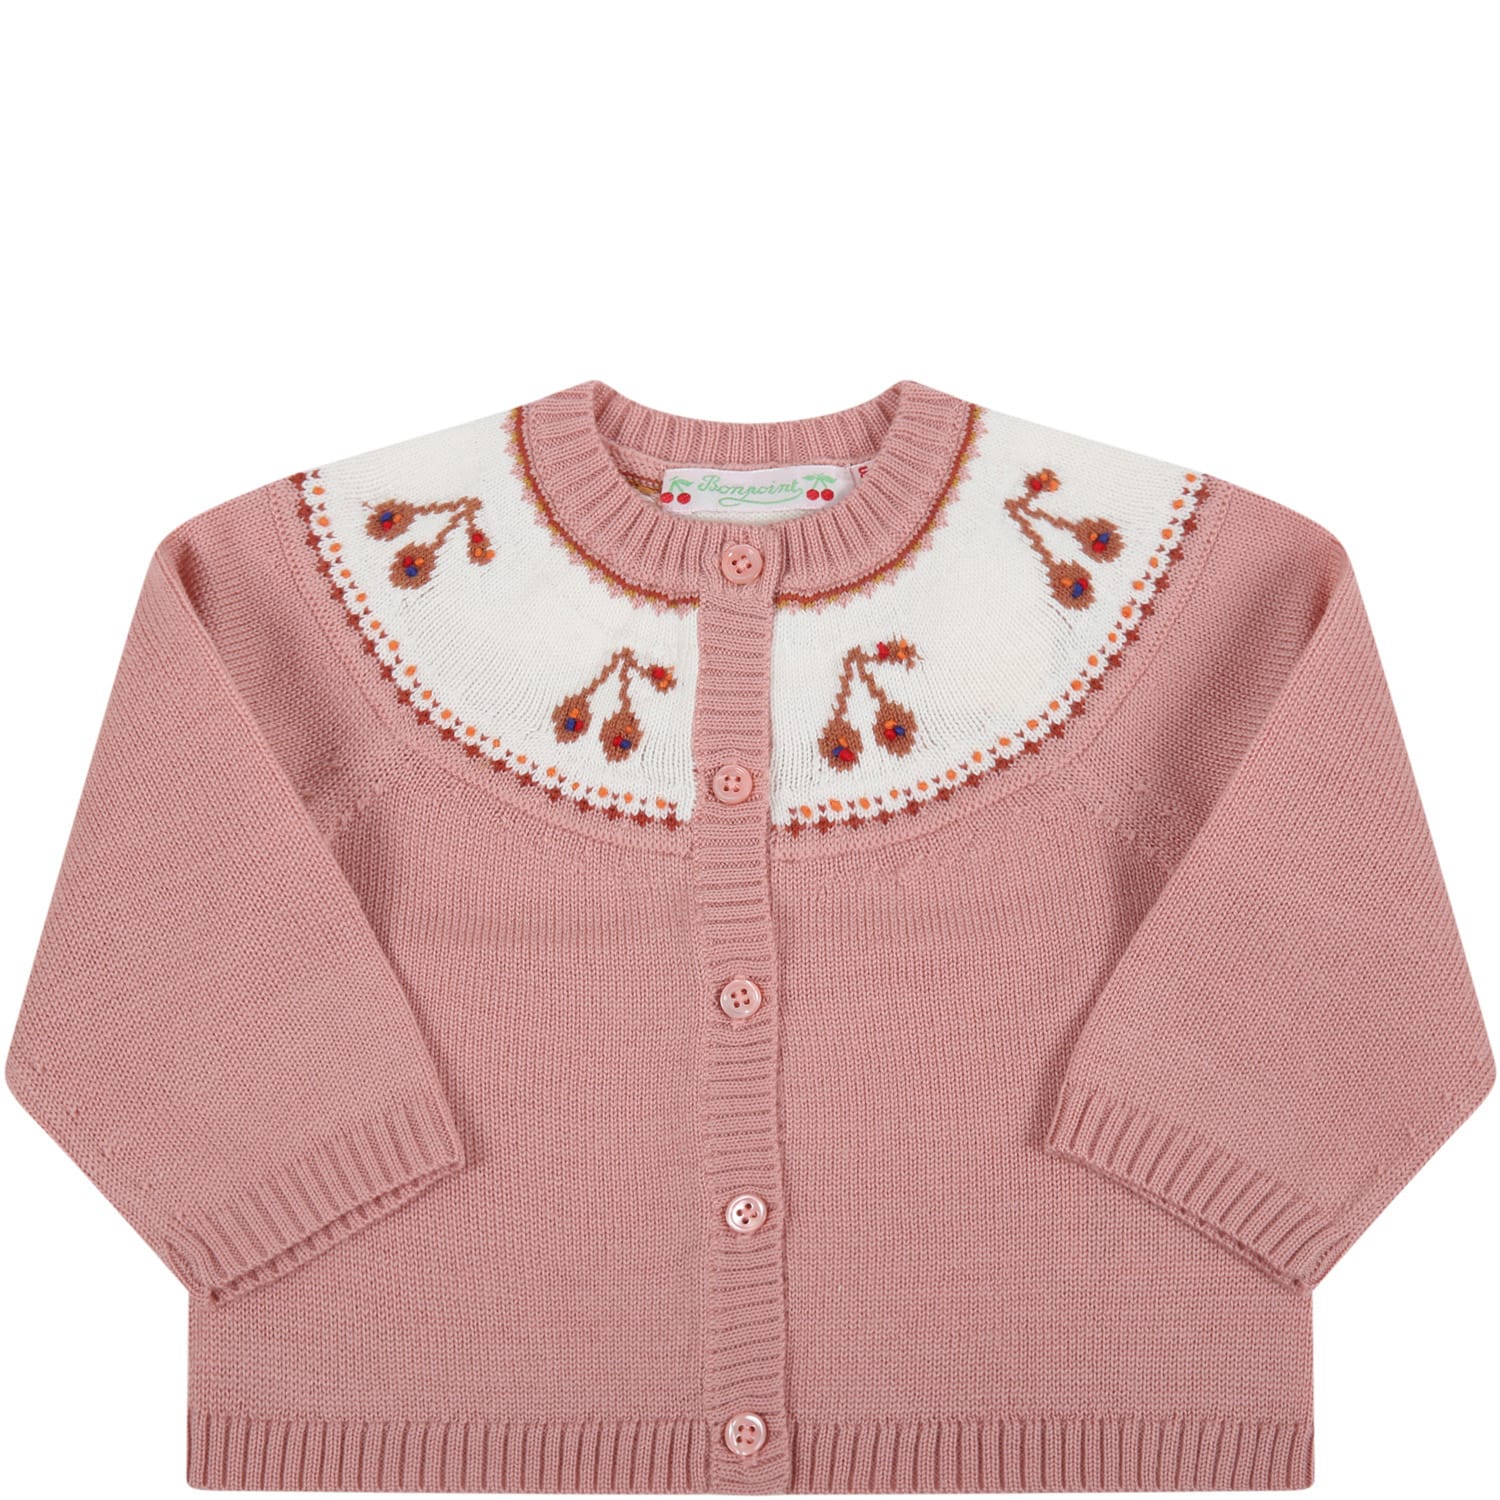 Bonpoint Pink Cardigan For Baby Girl With Cherries